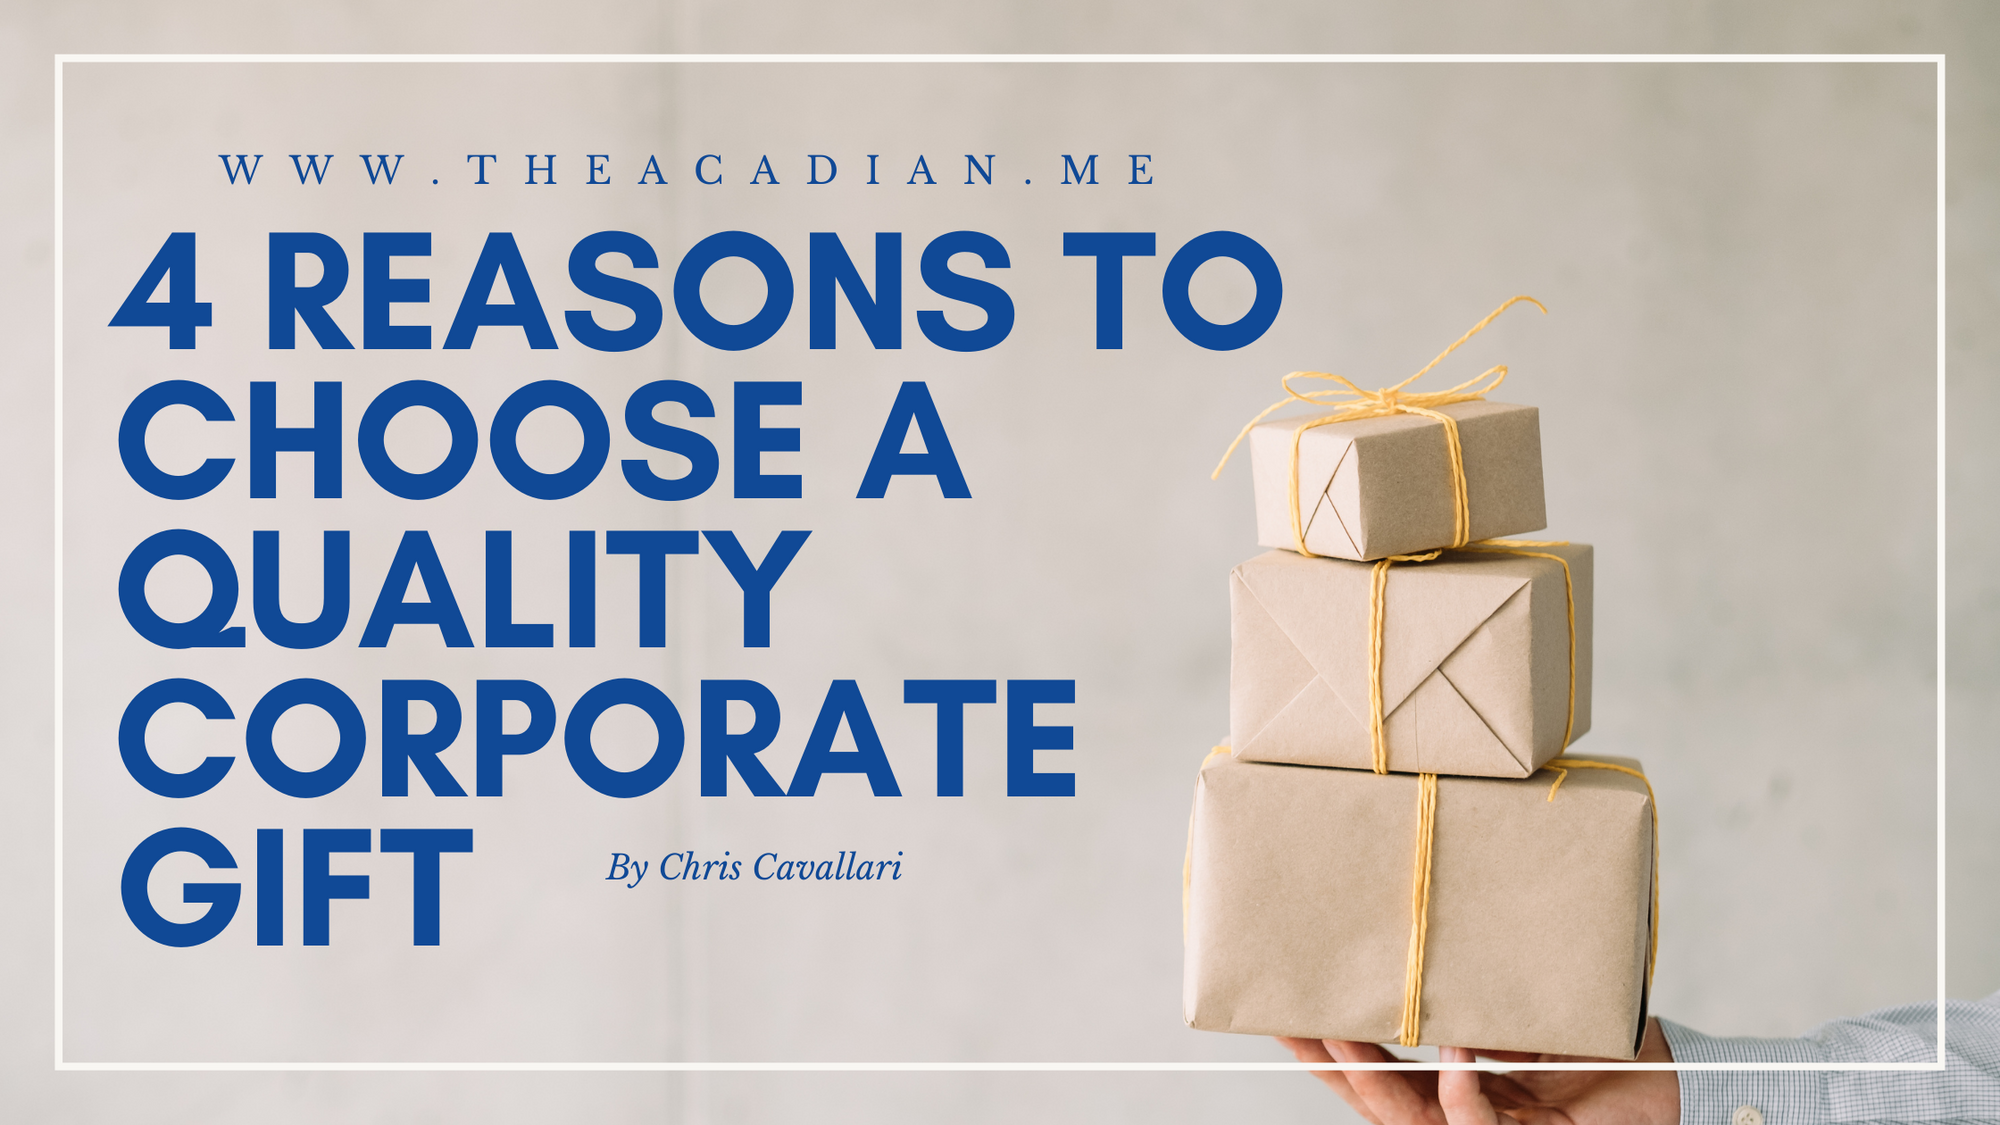 4 Reasons to Choose a Quality Corporate Gift